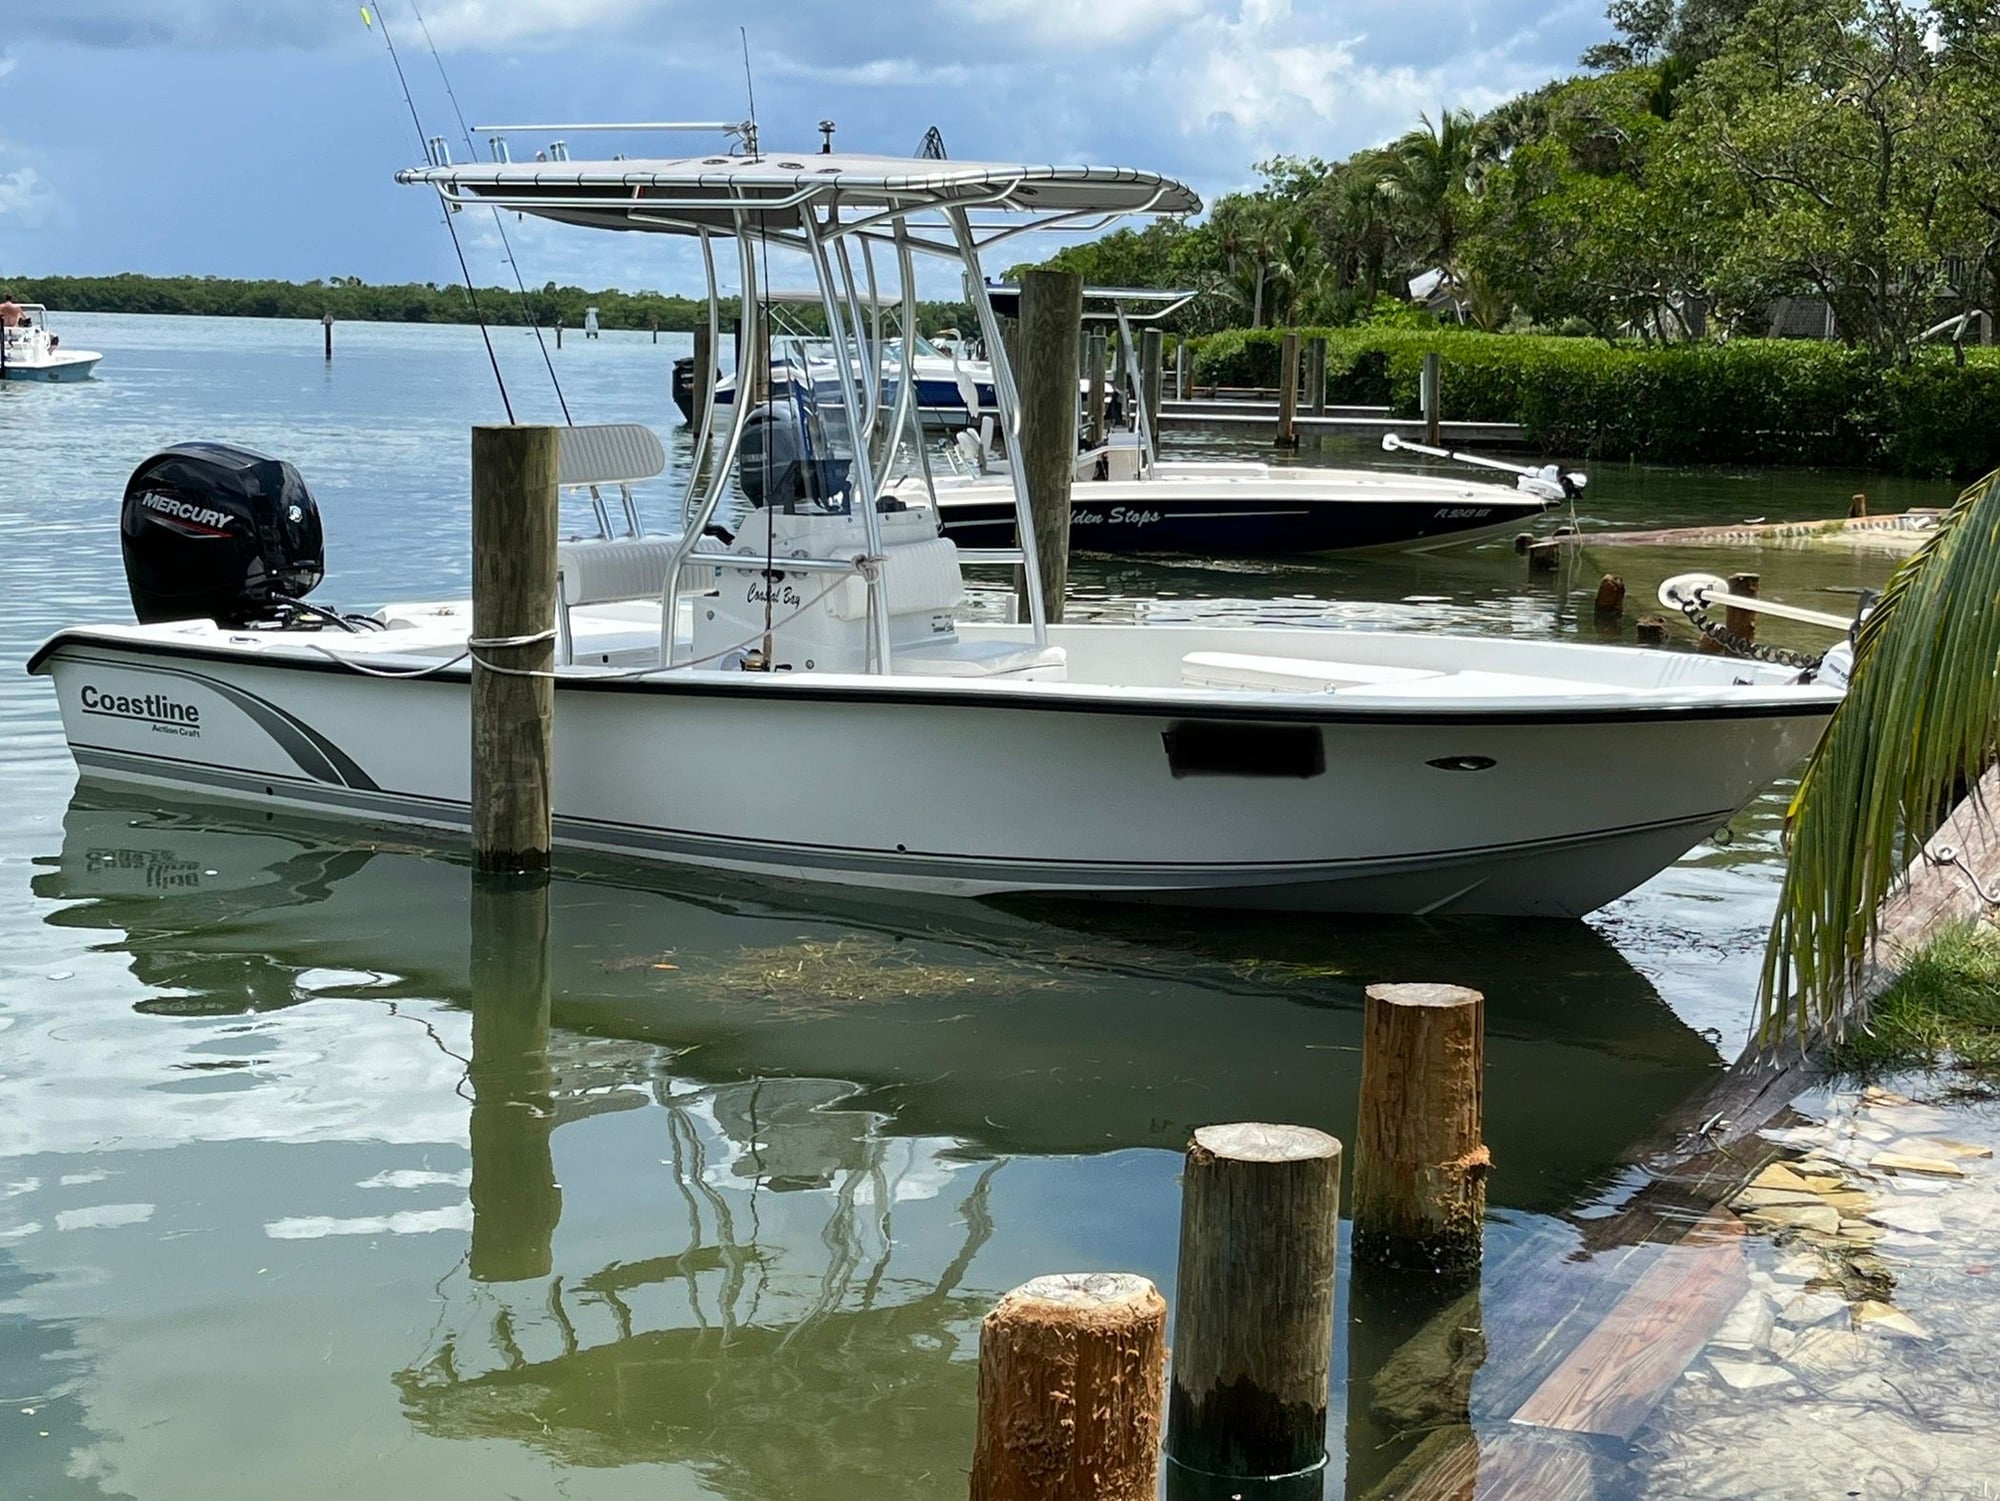 T top or bimini - The Hull Truth - Boating and Fishing Forum